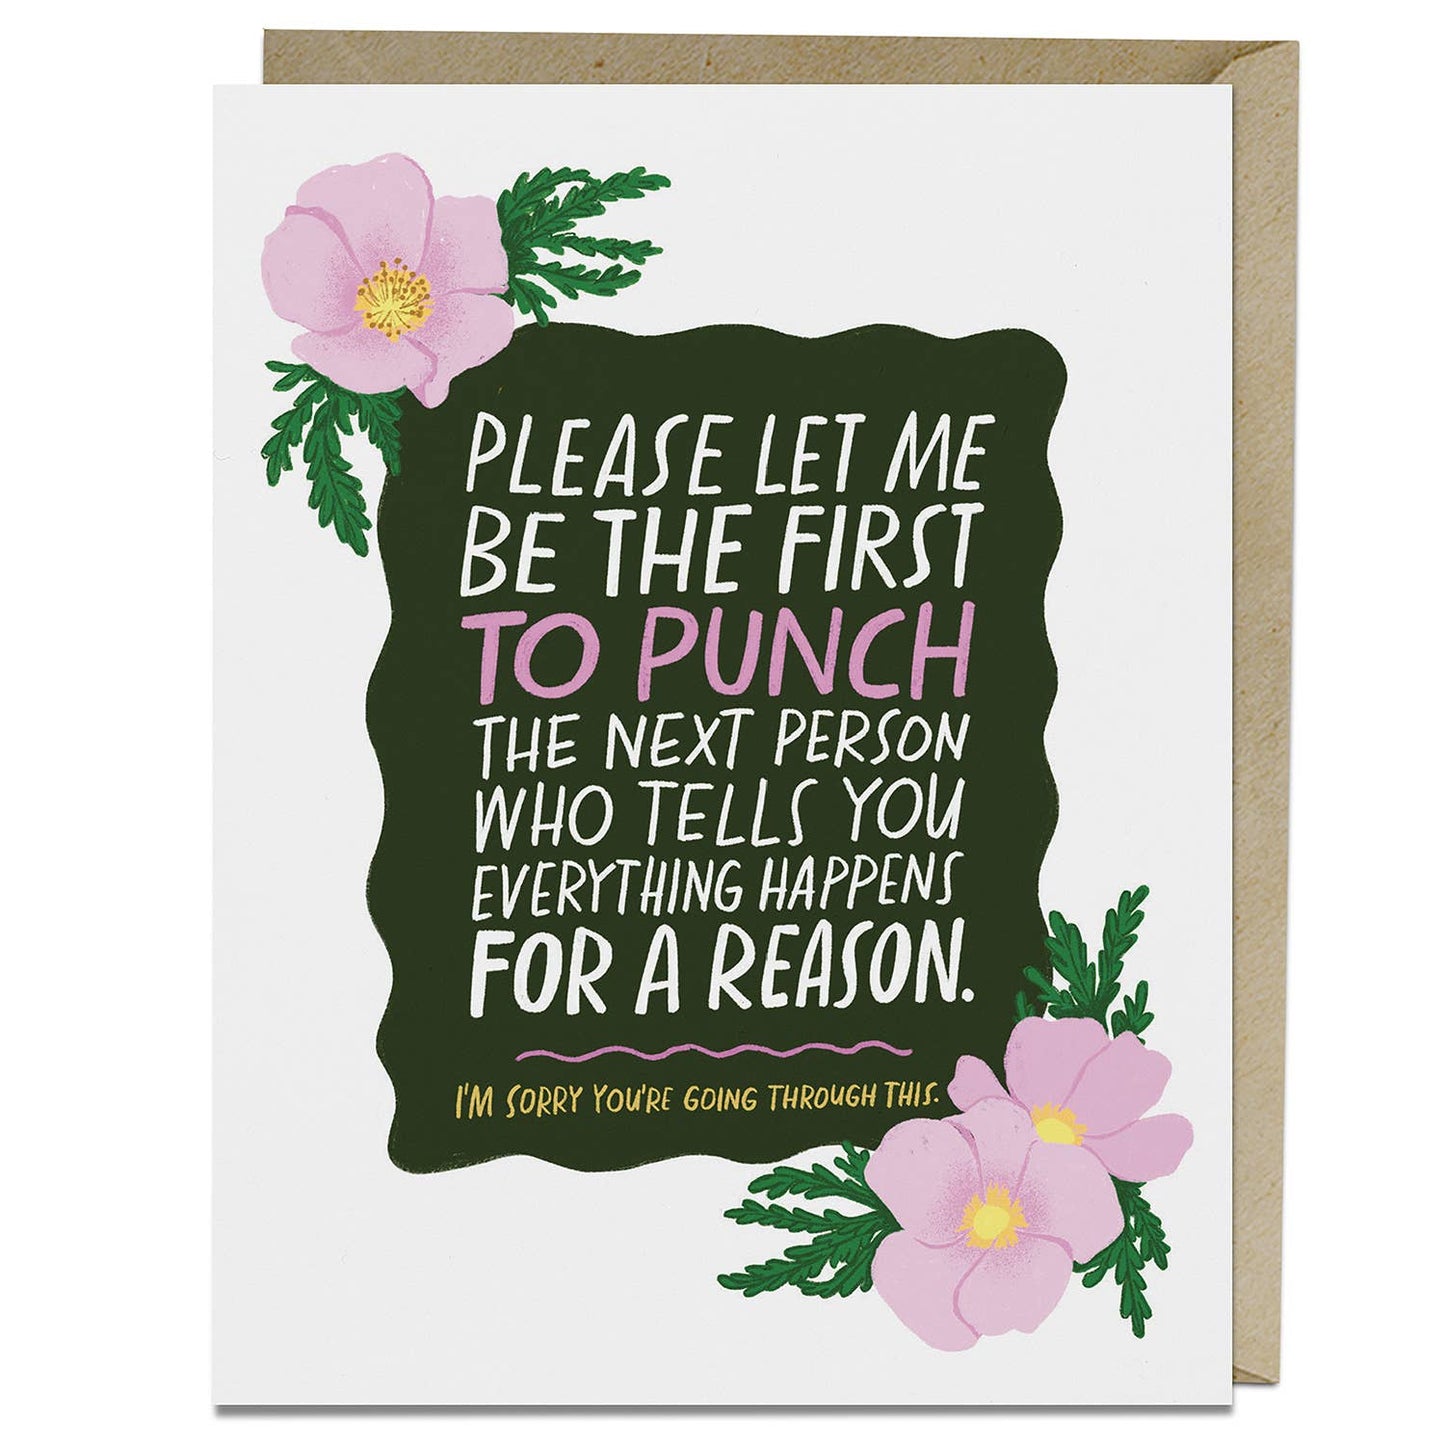 Em & Friends - Everything Happens for a Reason Empathy Card